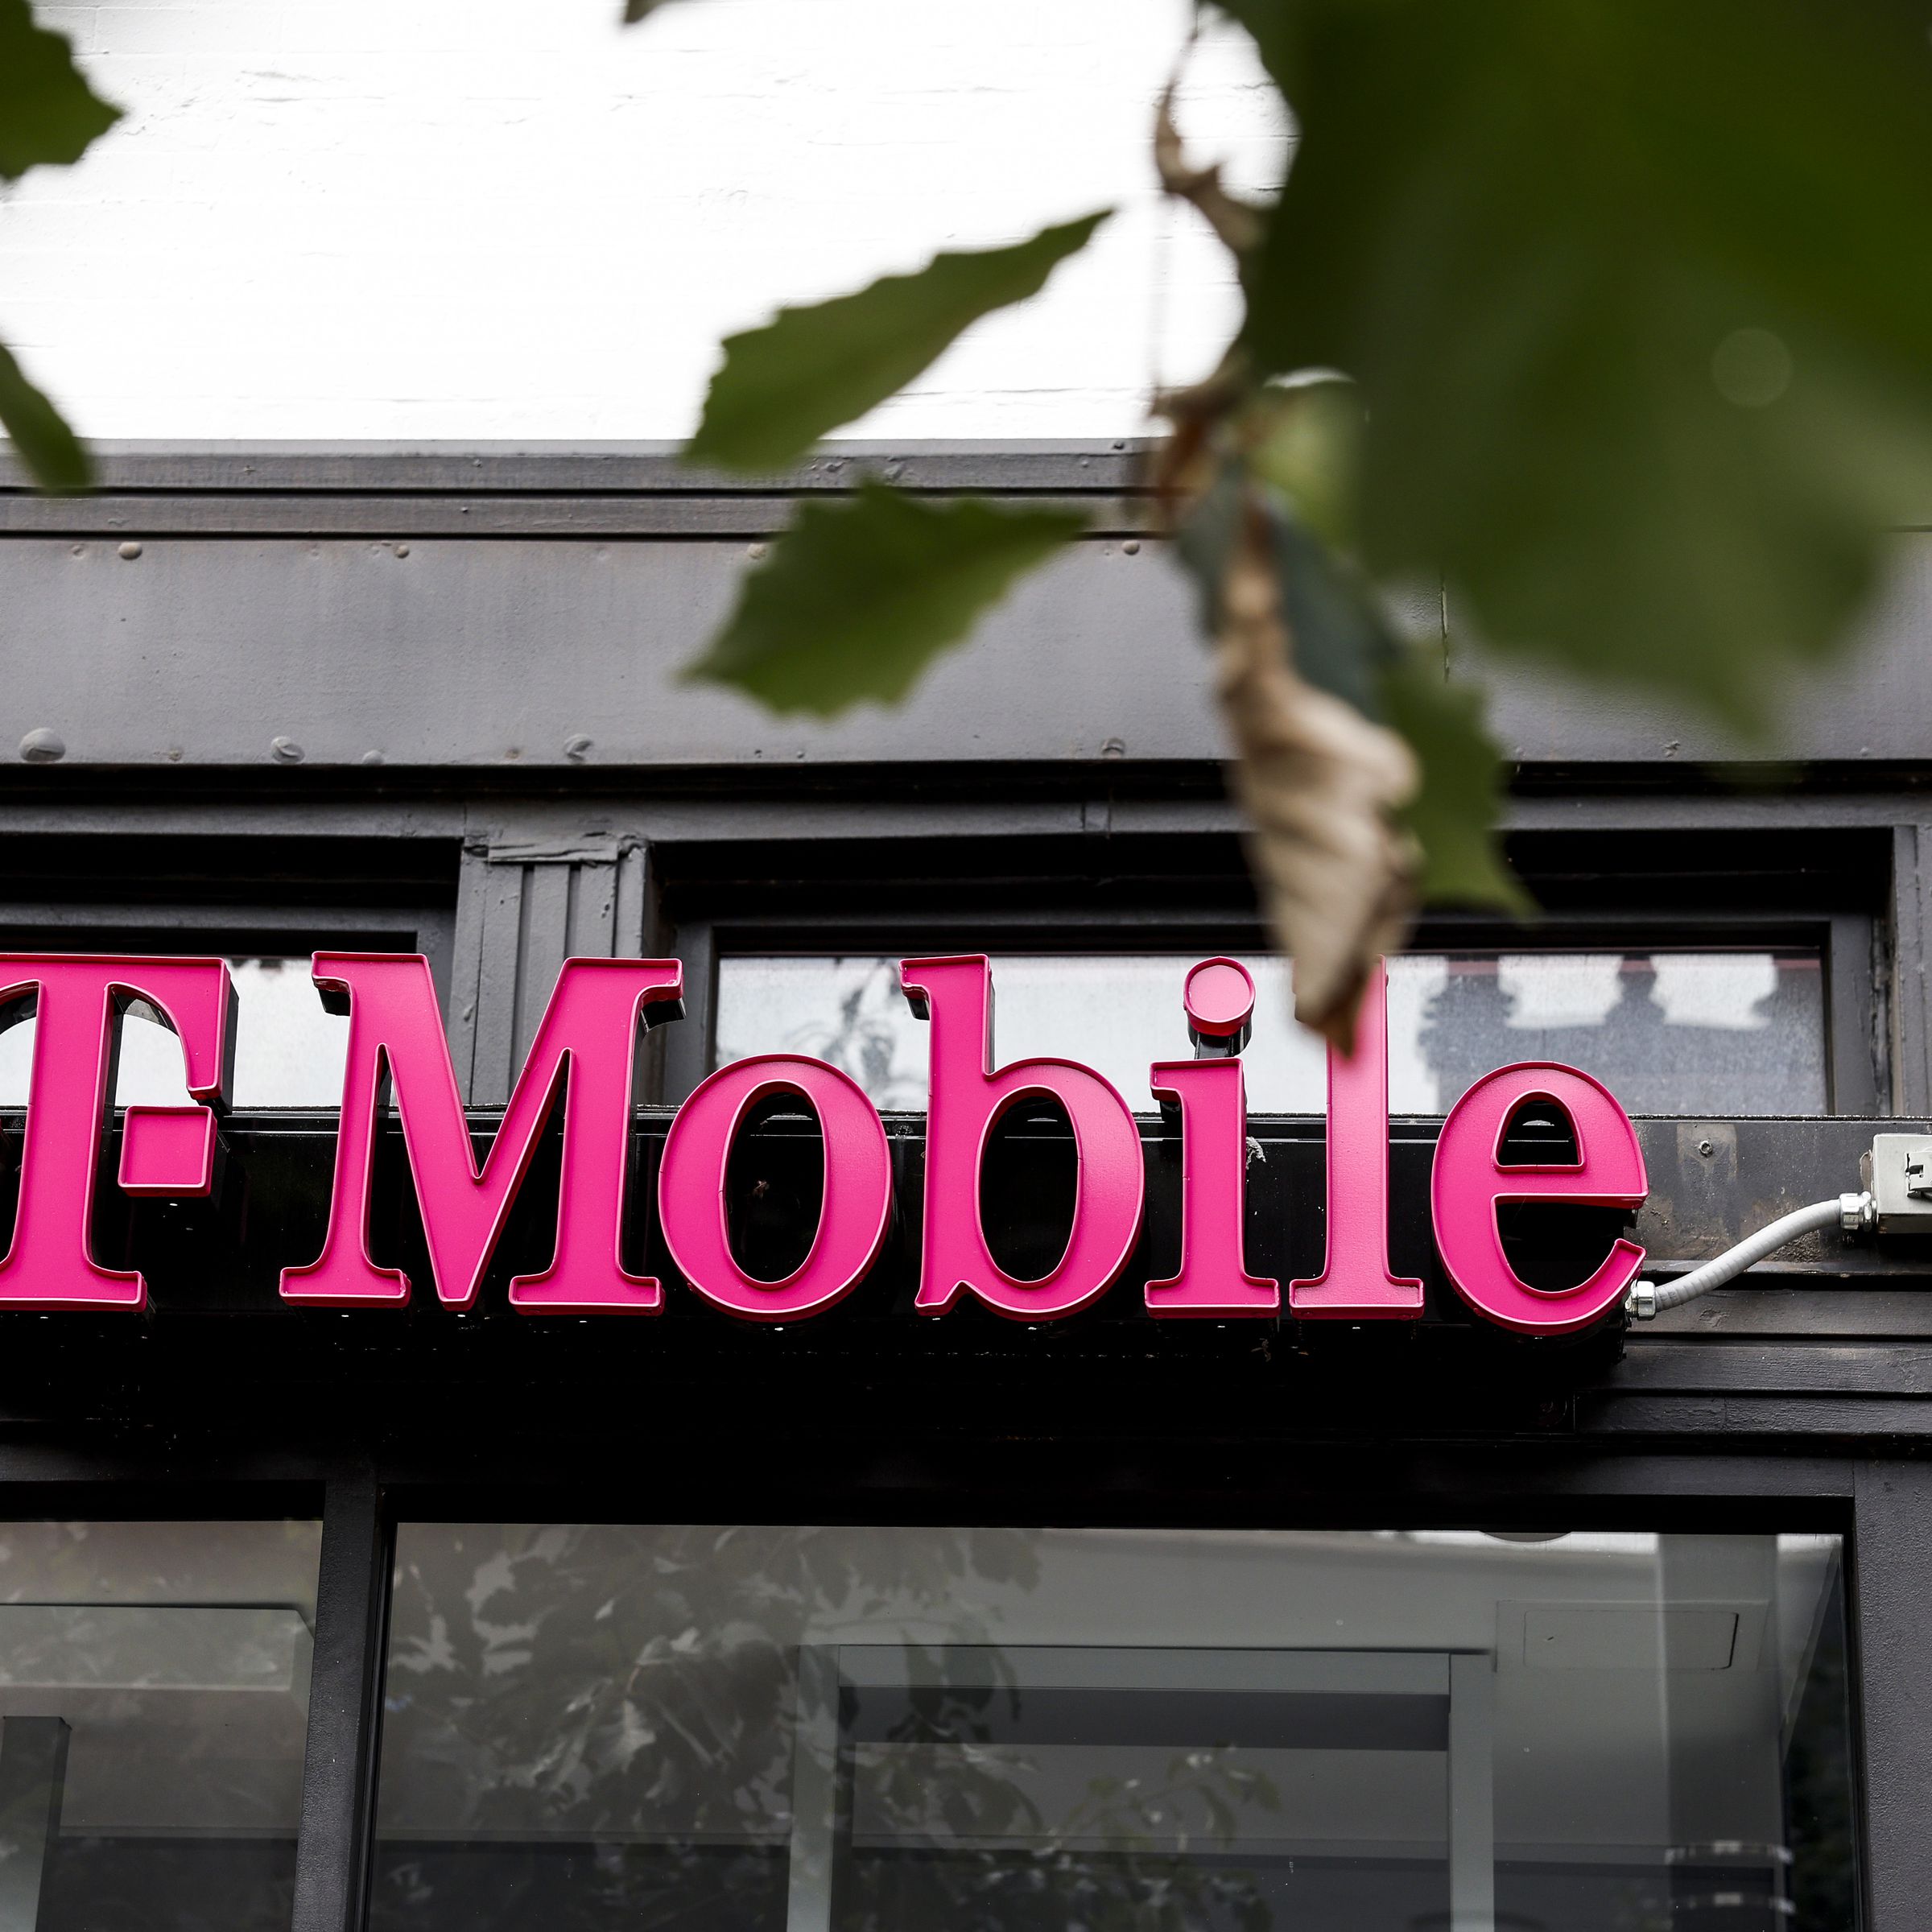 Signage for T-Mobile hangs on a storefront